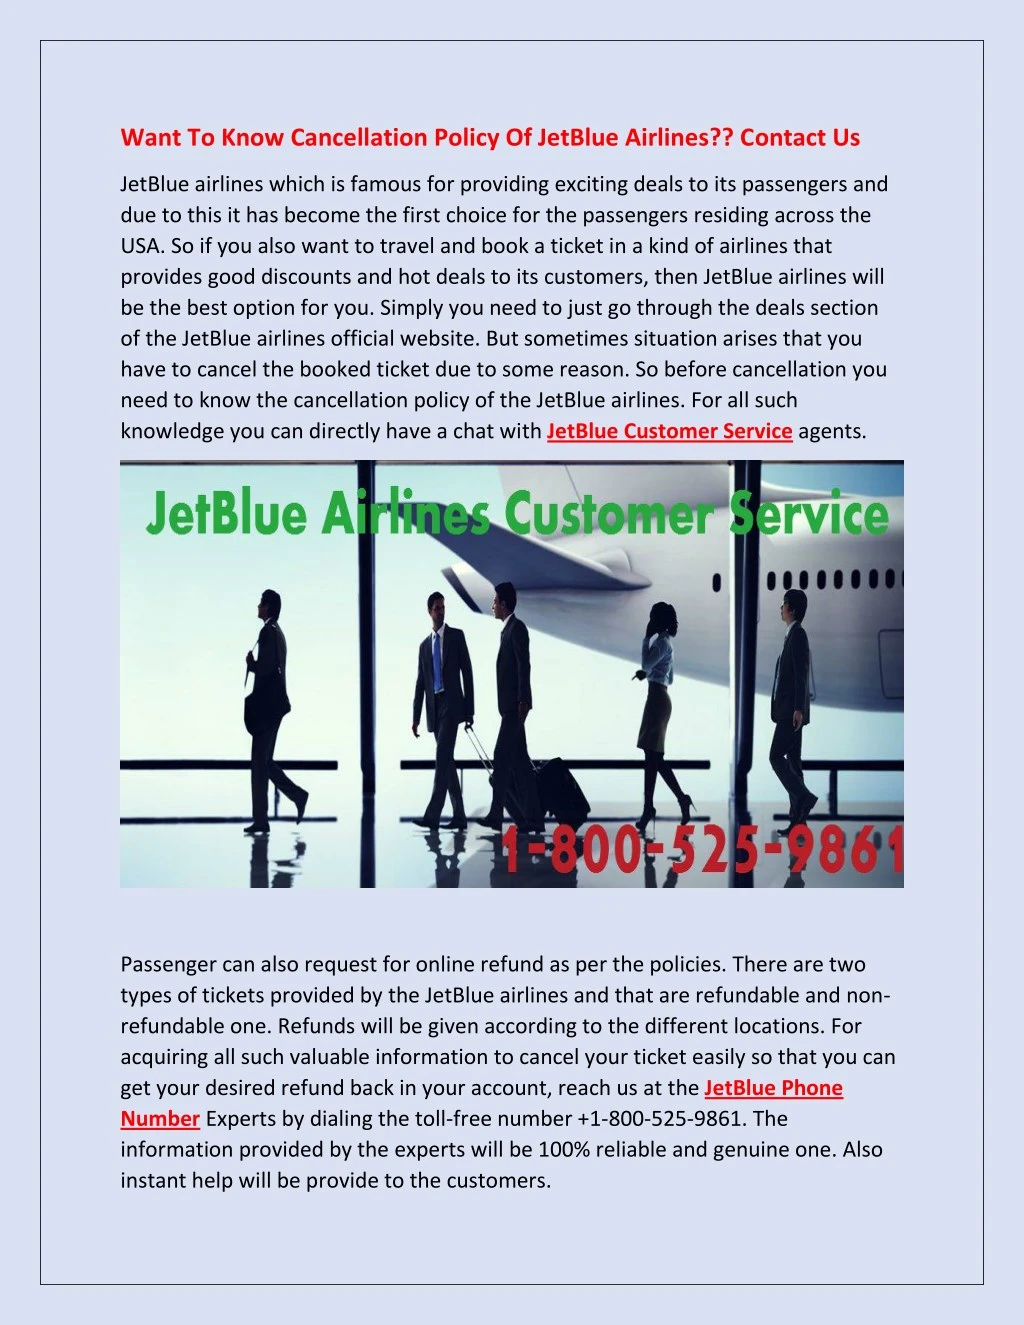 want to know cancellation policy of jetblue